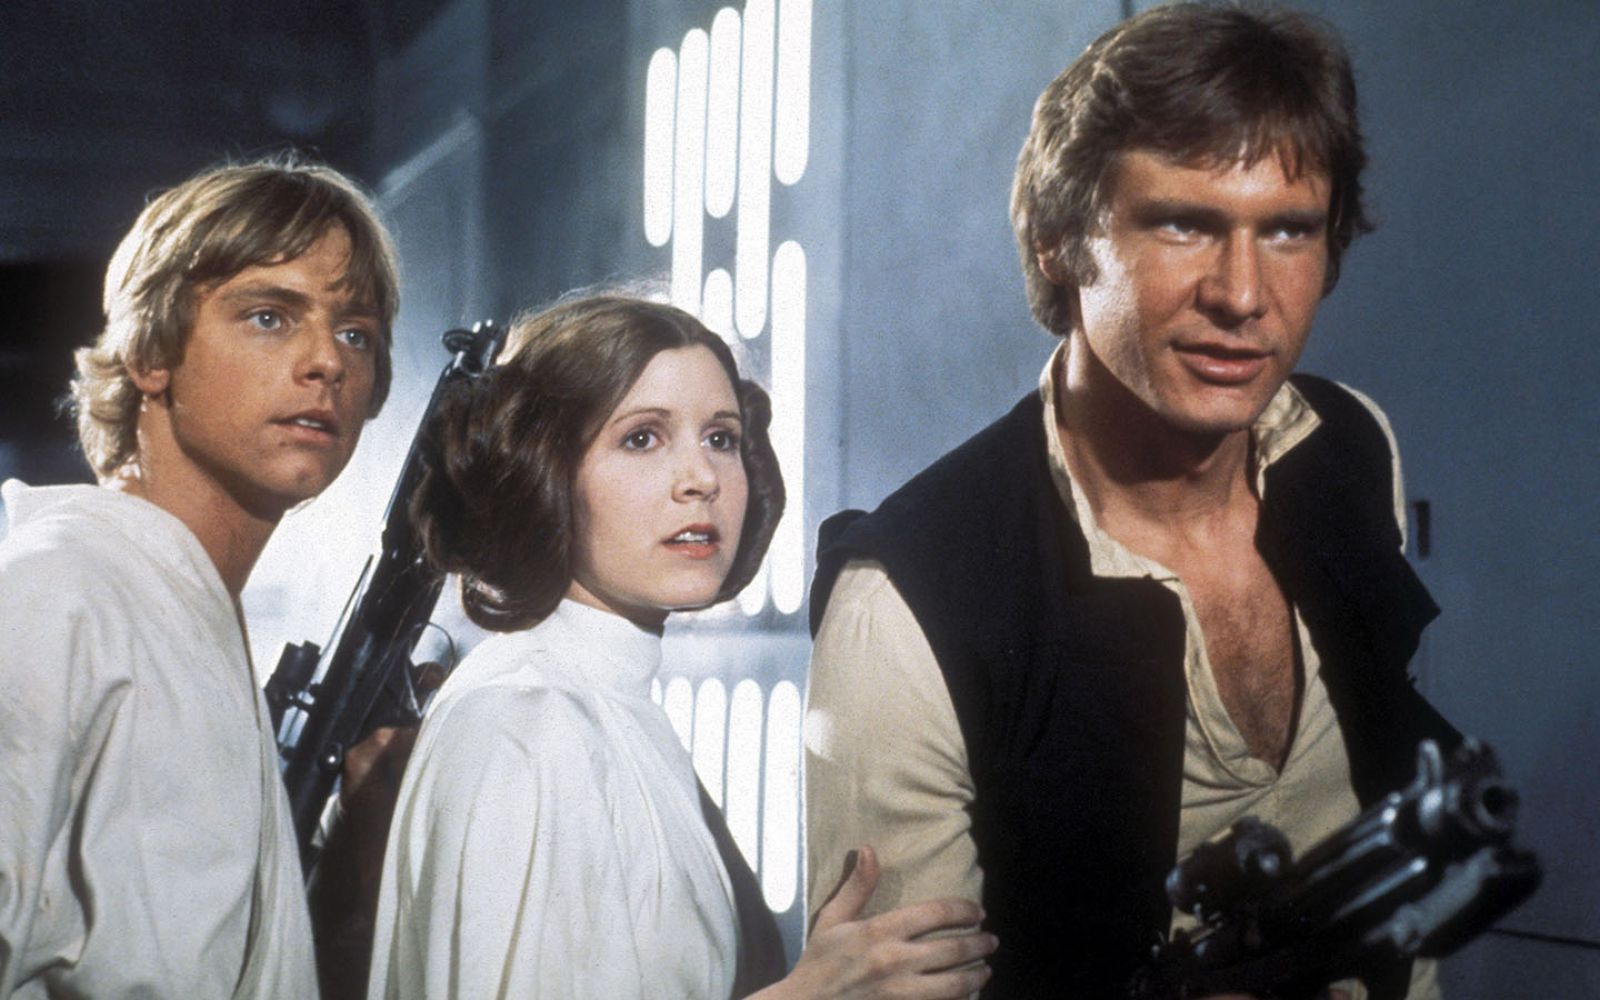 The downtown Allen County Public Library will celebrate 'Star Wars' Day on Saturday, May 4.